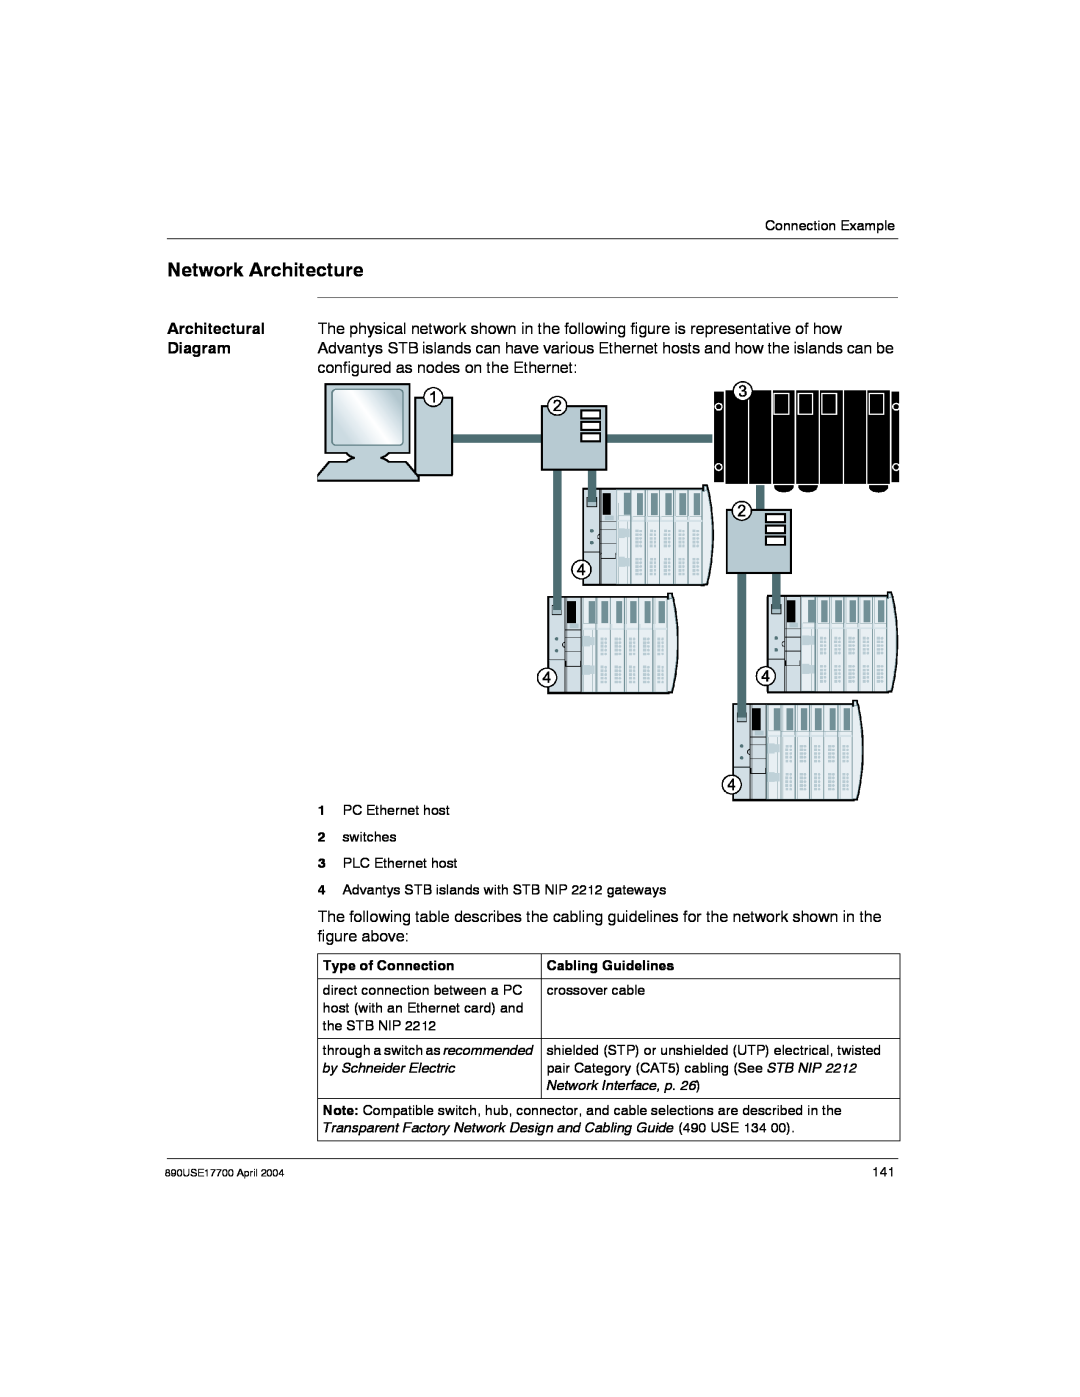 Schneider Electric 890USE17700 manual Network Architecture, Type of Connection, Cabling Guidelines 